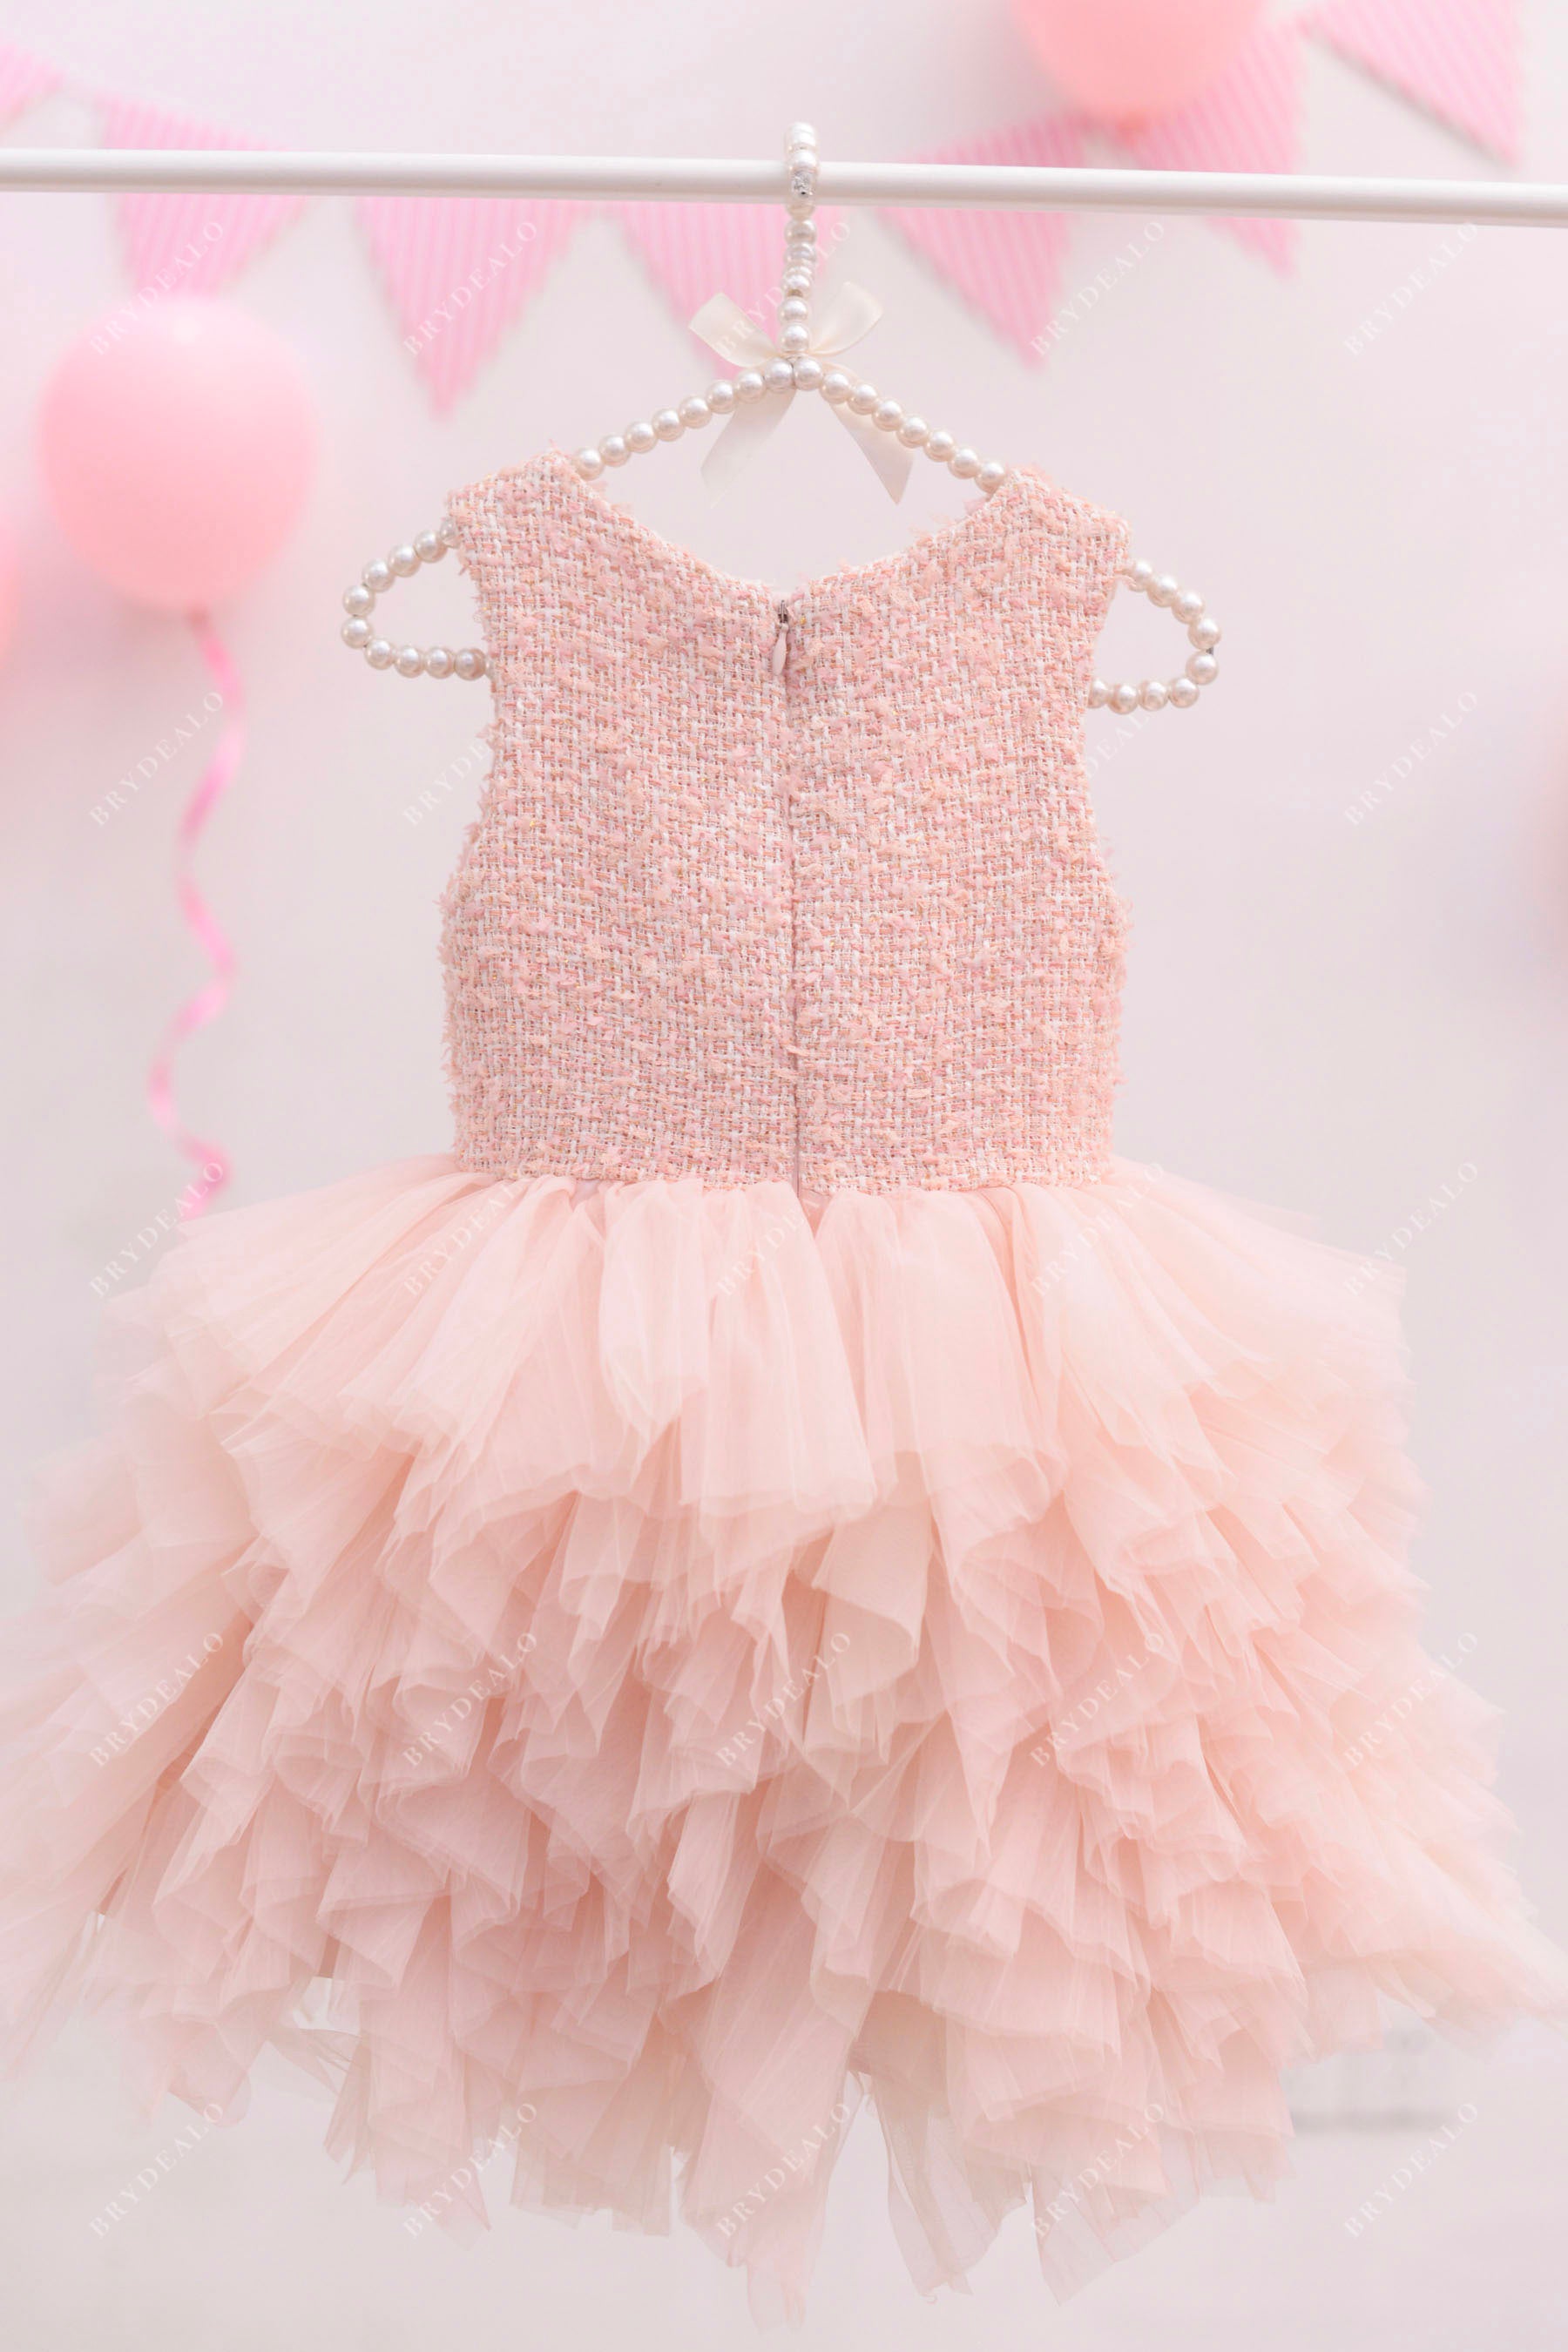 A-line knee length kids formal gown